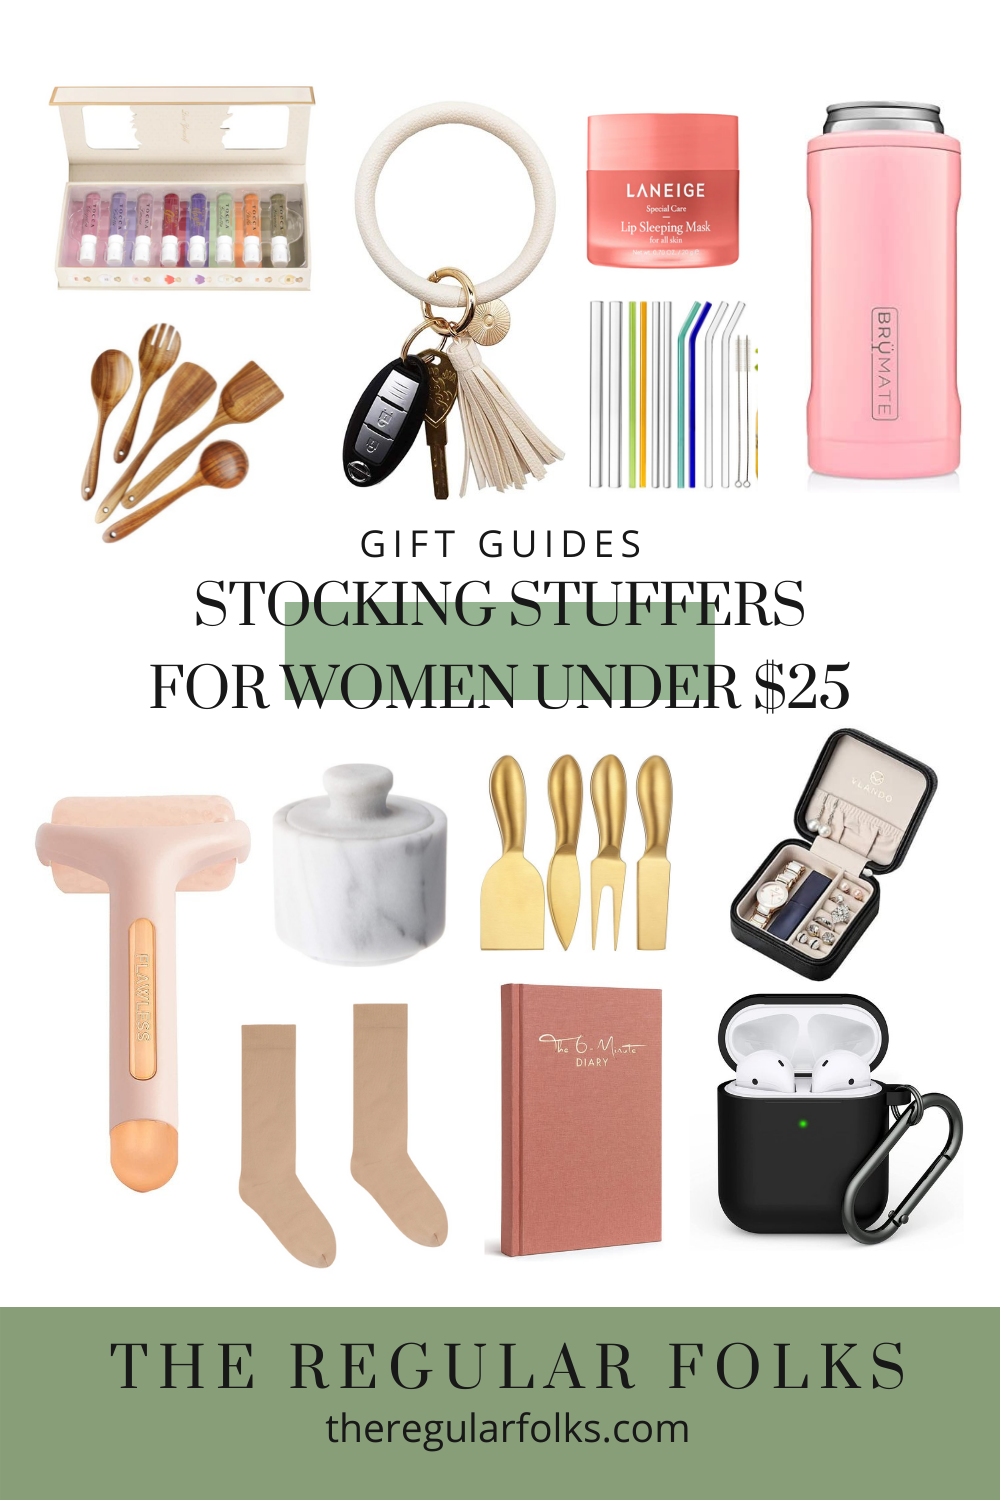 Last Minute Stocking Stuffers and Gift Ideas Under $25 from